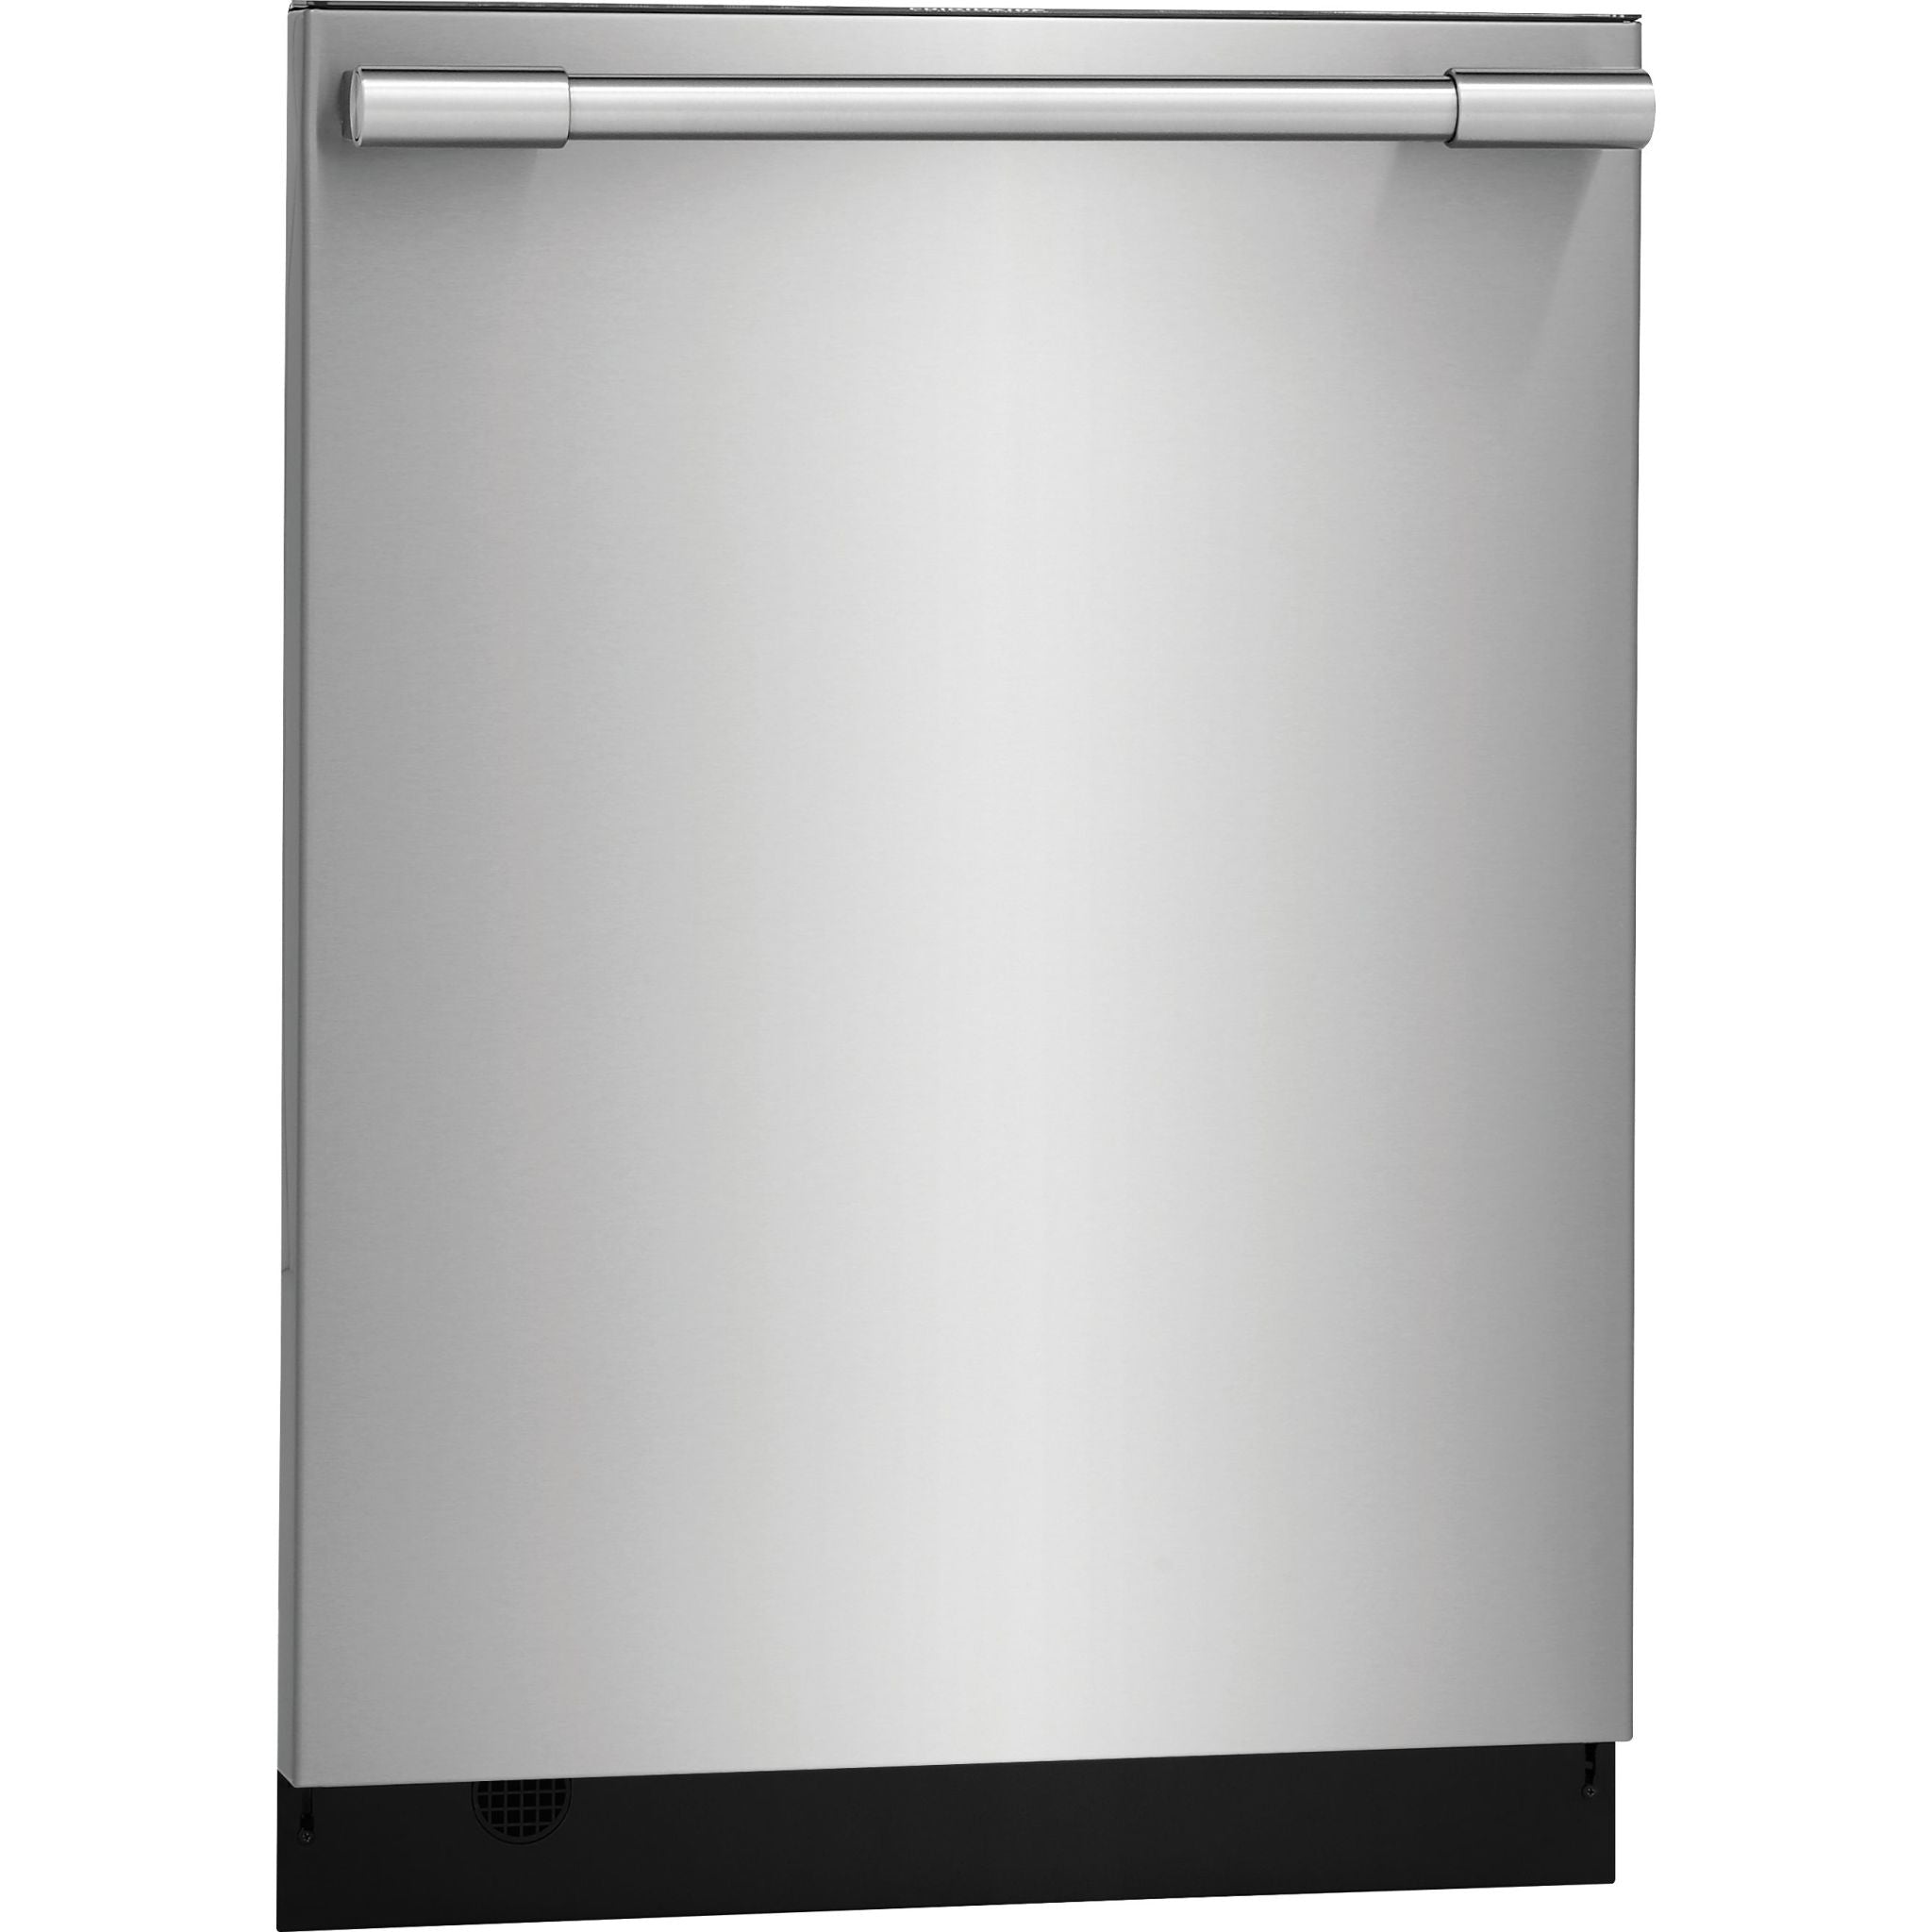 Frigidaire Professional, Frigidaire Professional Dishwasher Stainless Steel Tub (FPID2498SF) - Stainless Steel